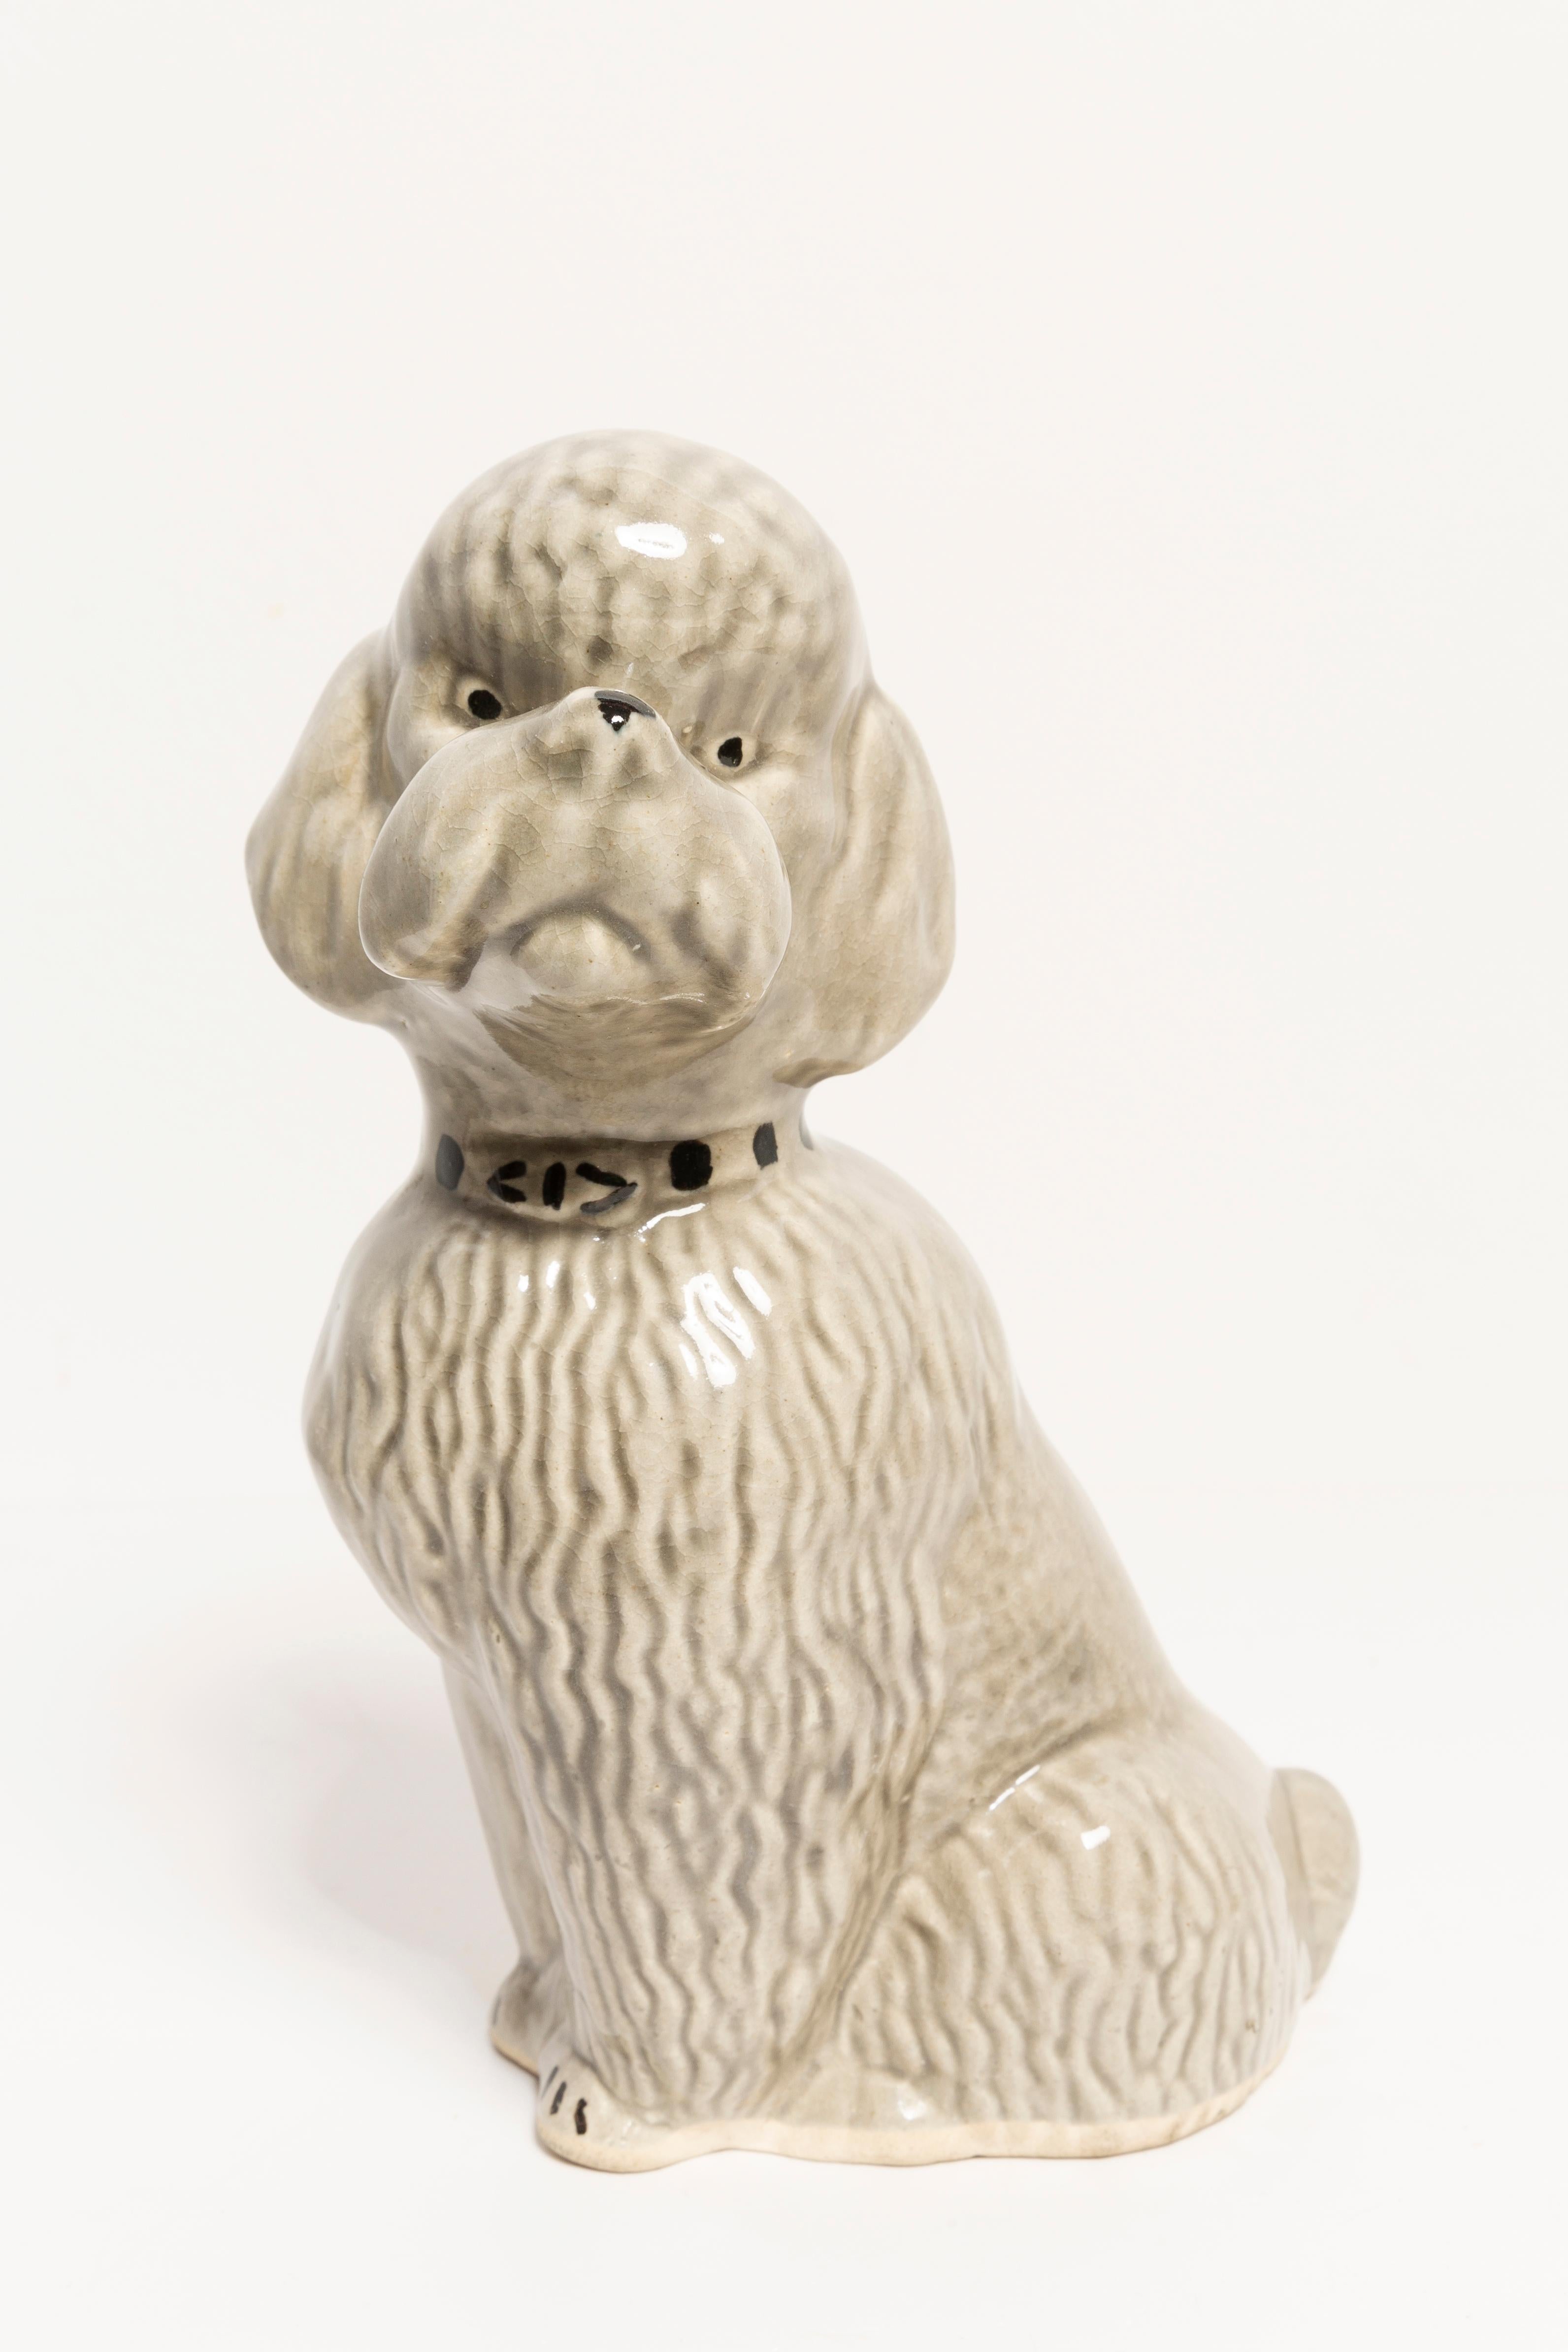 Painted ceramic, very good original vintage condition. No damages or cracks. Beautiful and unique decorative sculpture. Gray Poodle Dog Sculpture was produced in Italy. Only one dog available.